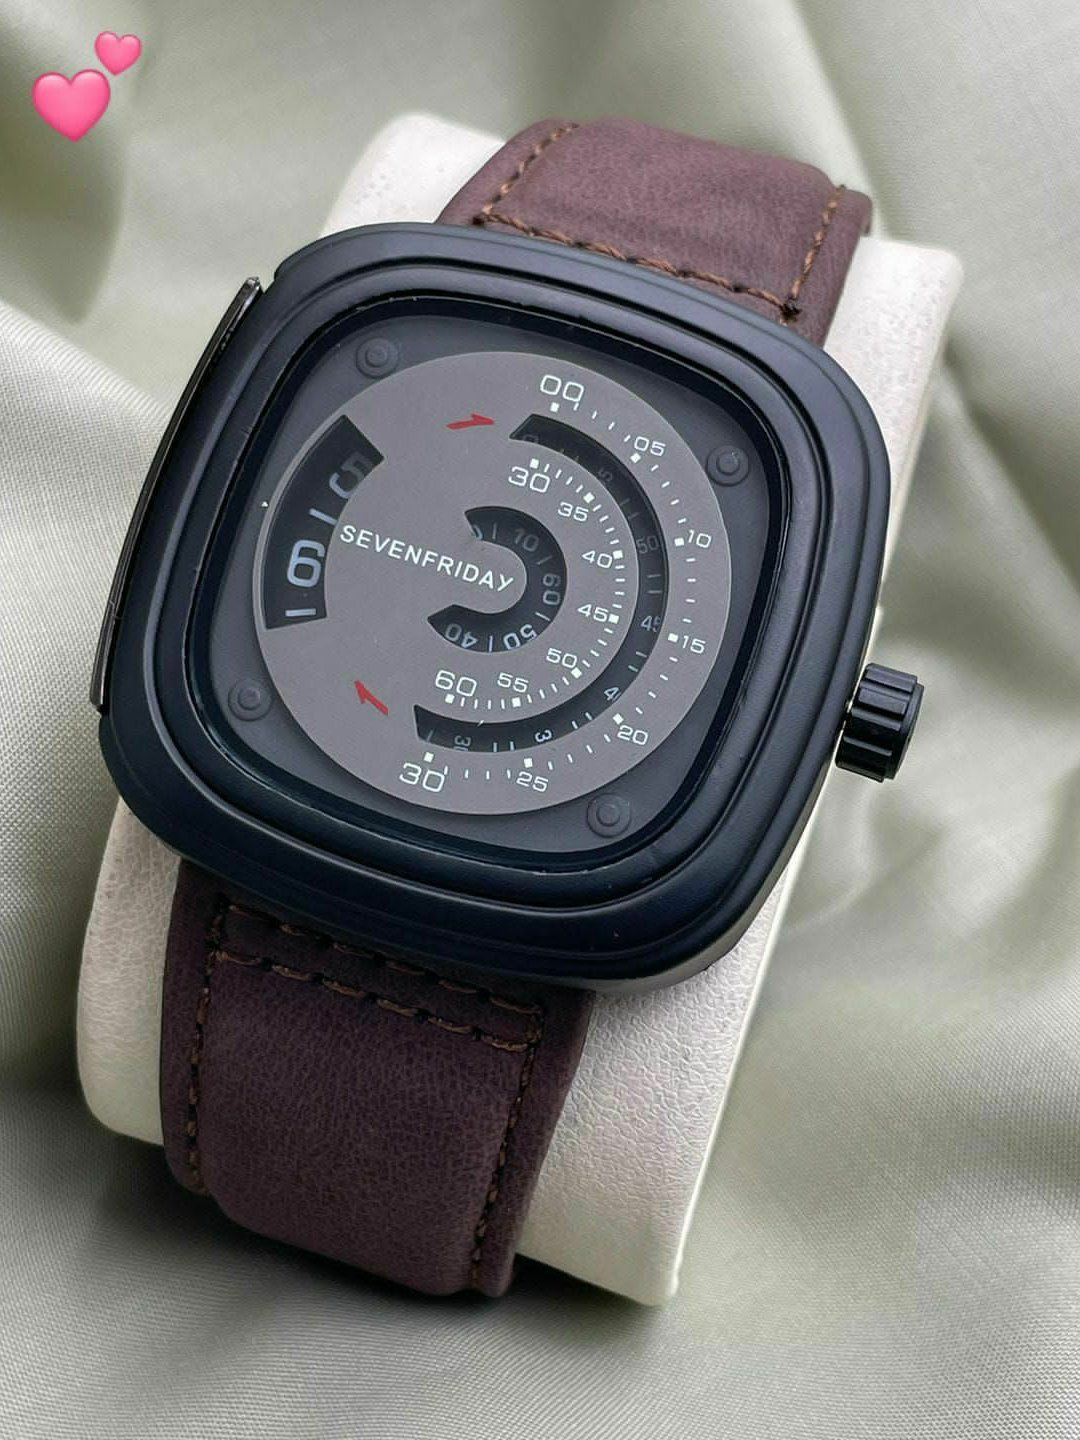 SEVEN FRIDAY T-SERIES T3/01 ENGINE automatic watch